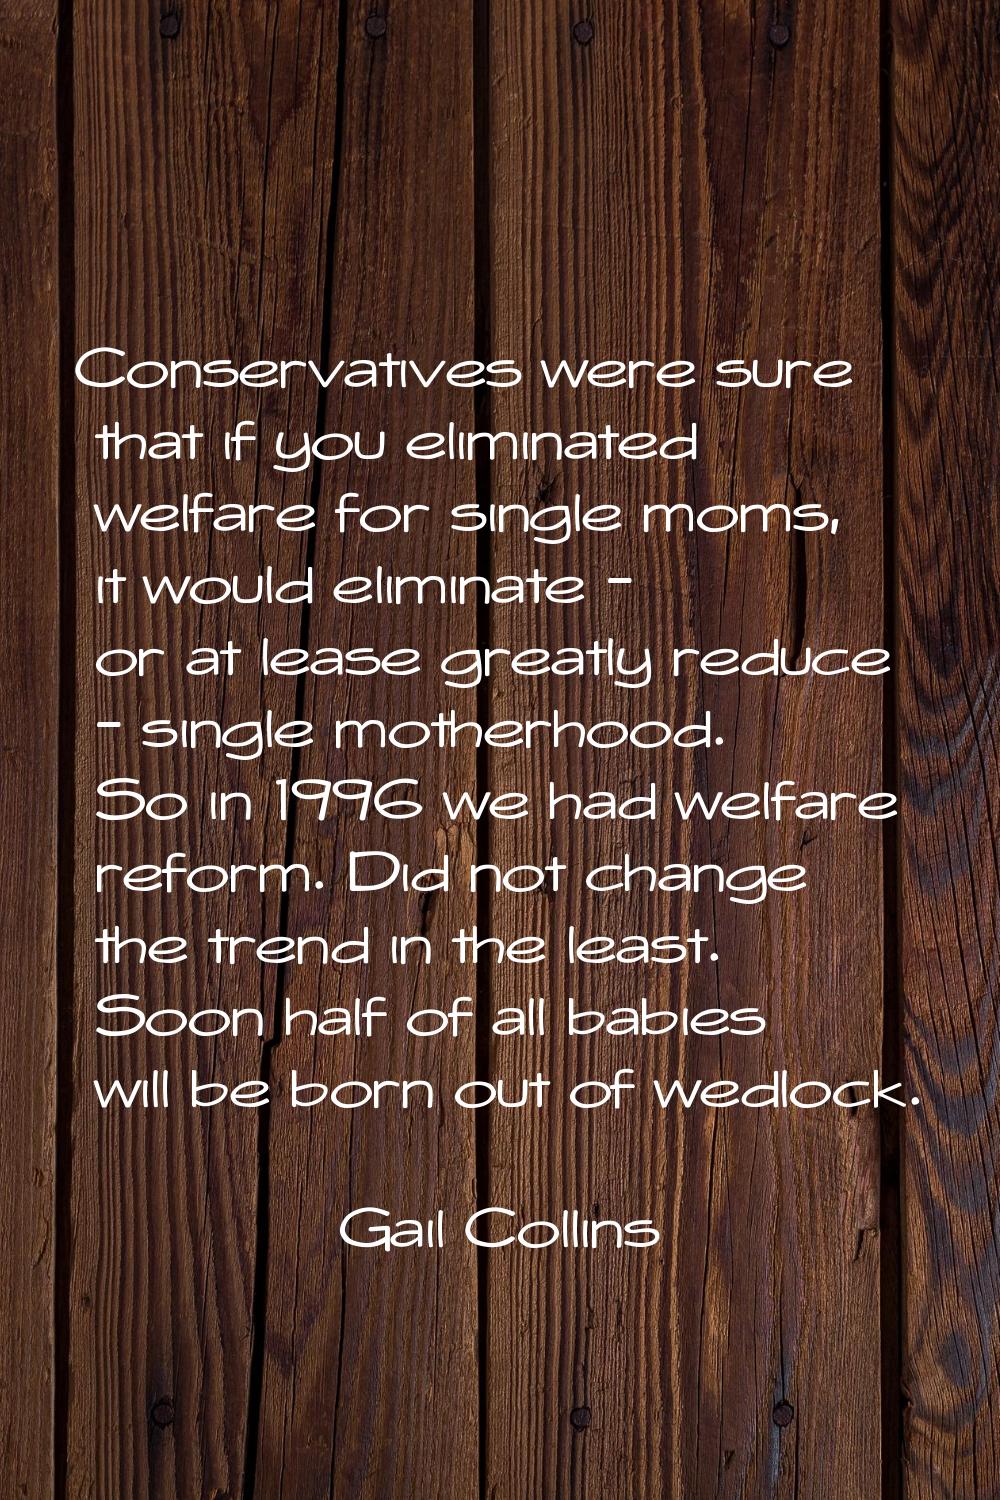 Conservatives were sure that if you eliminated welfare for single moms, it would eliminate - or at 